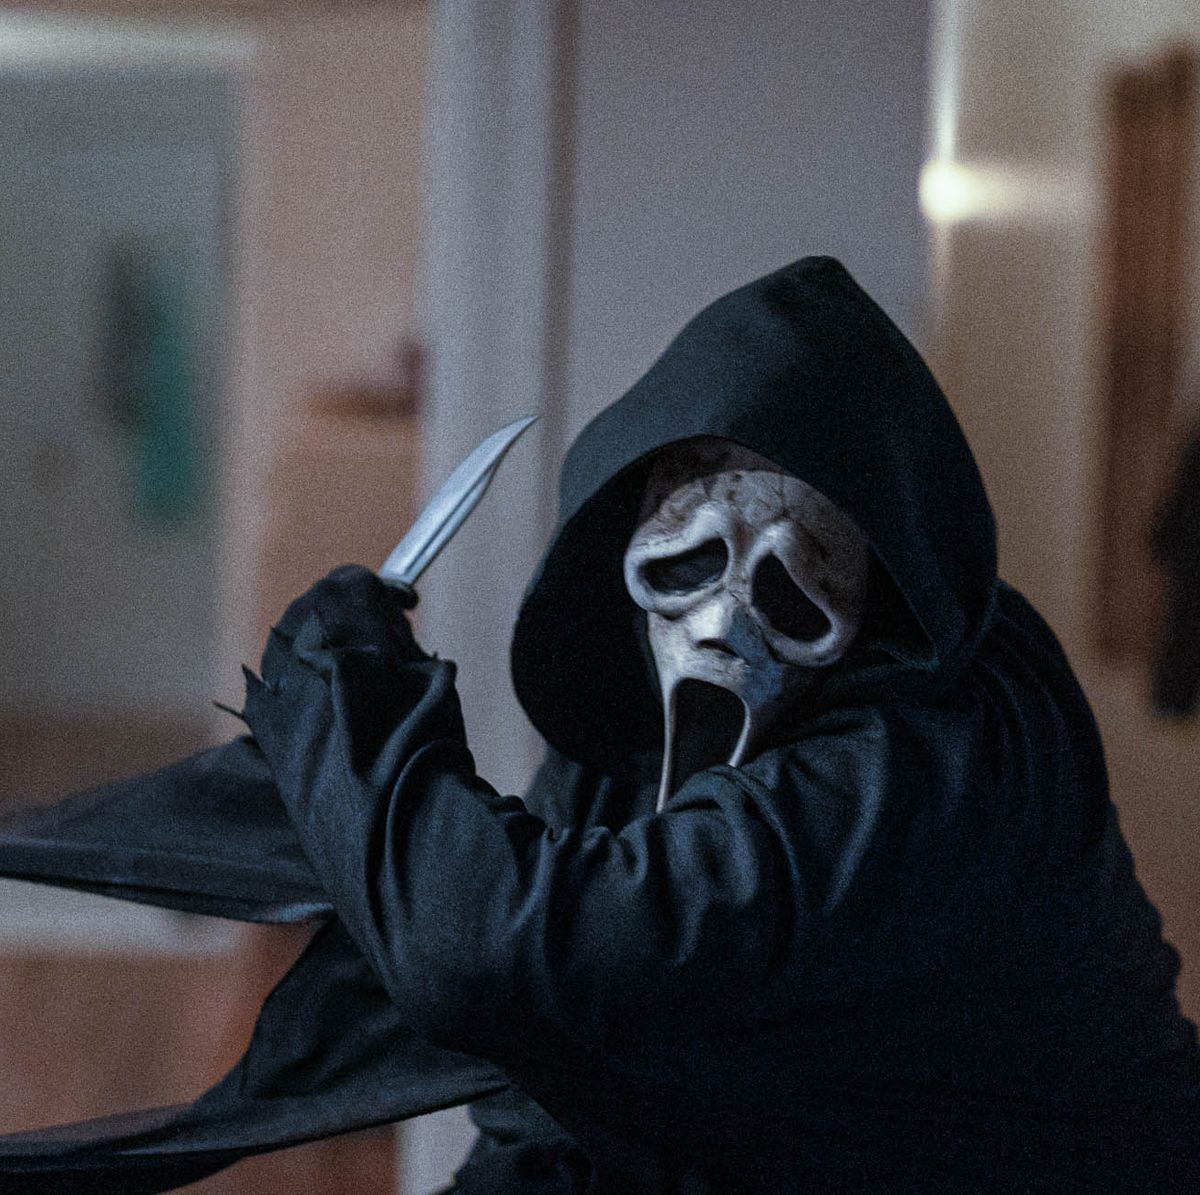 See new Ghostface mask in Scream 6 photo